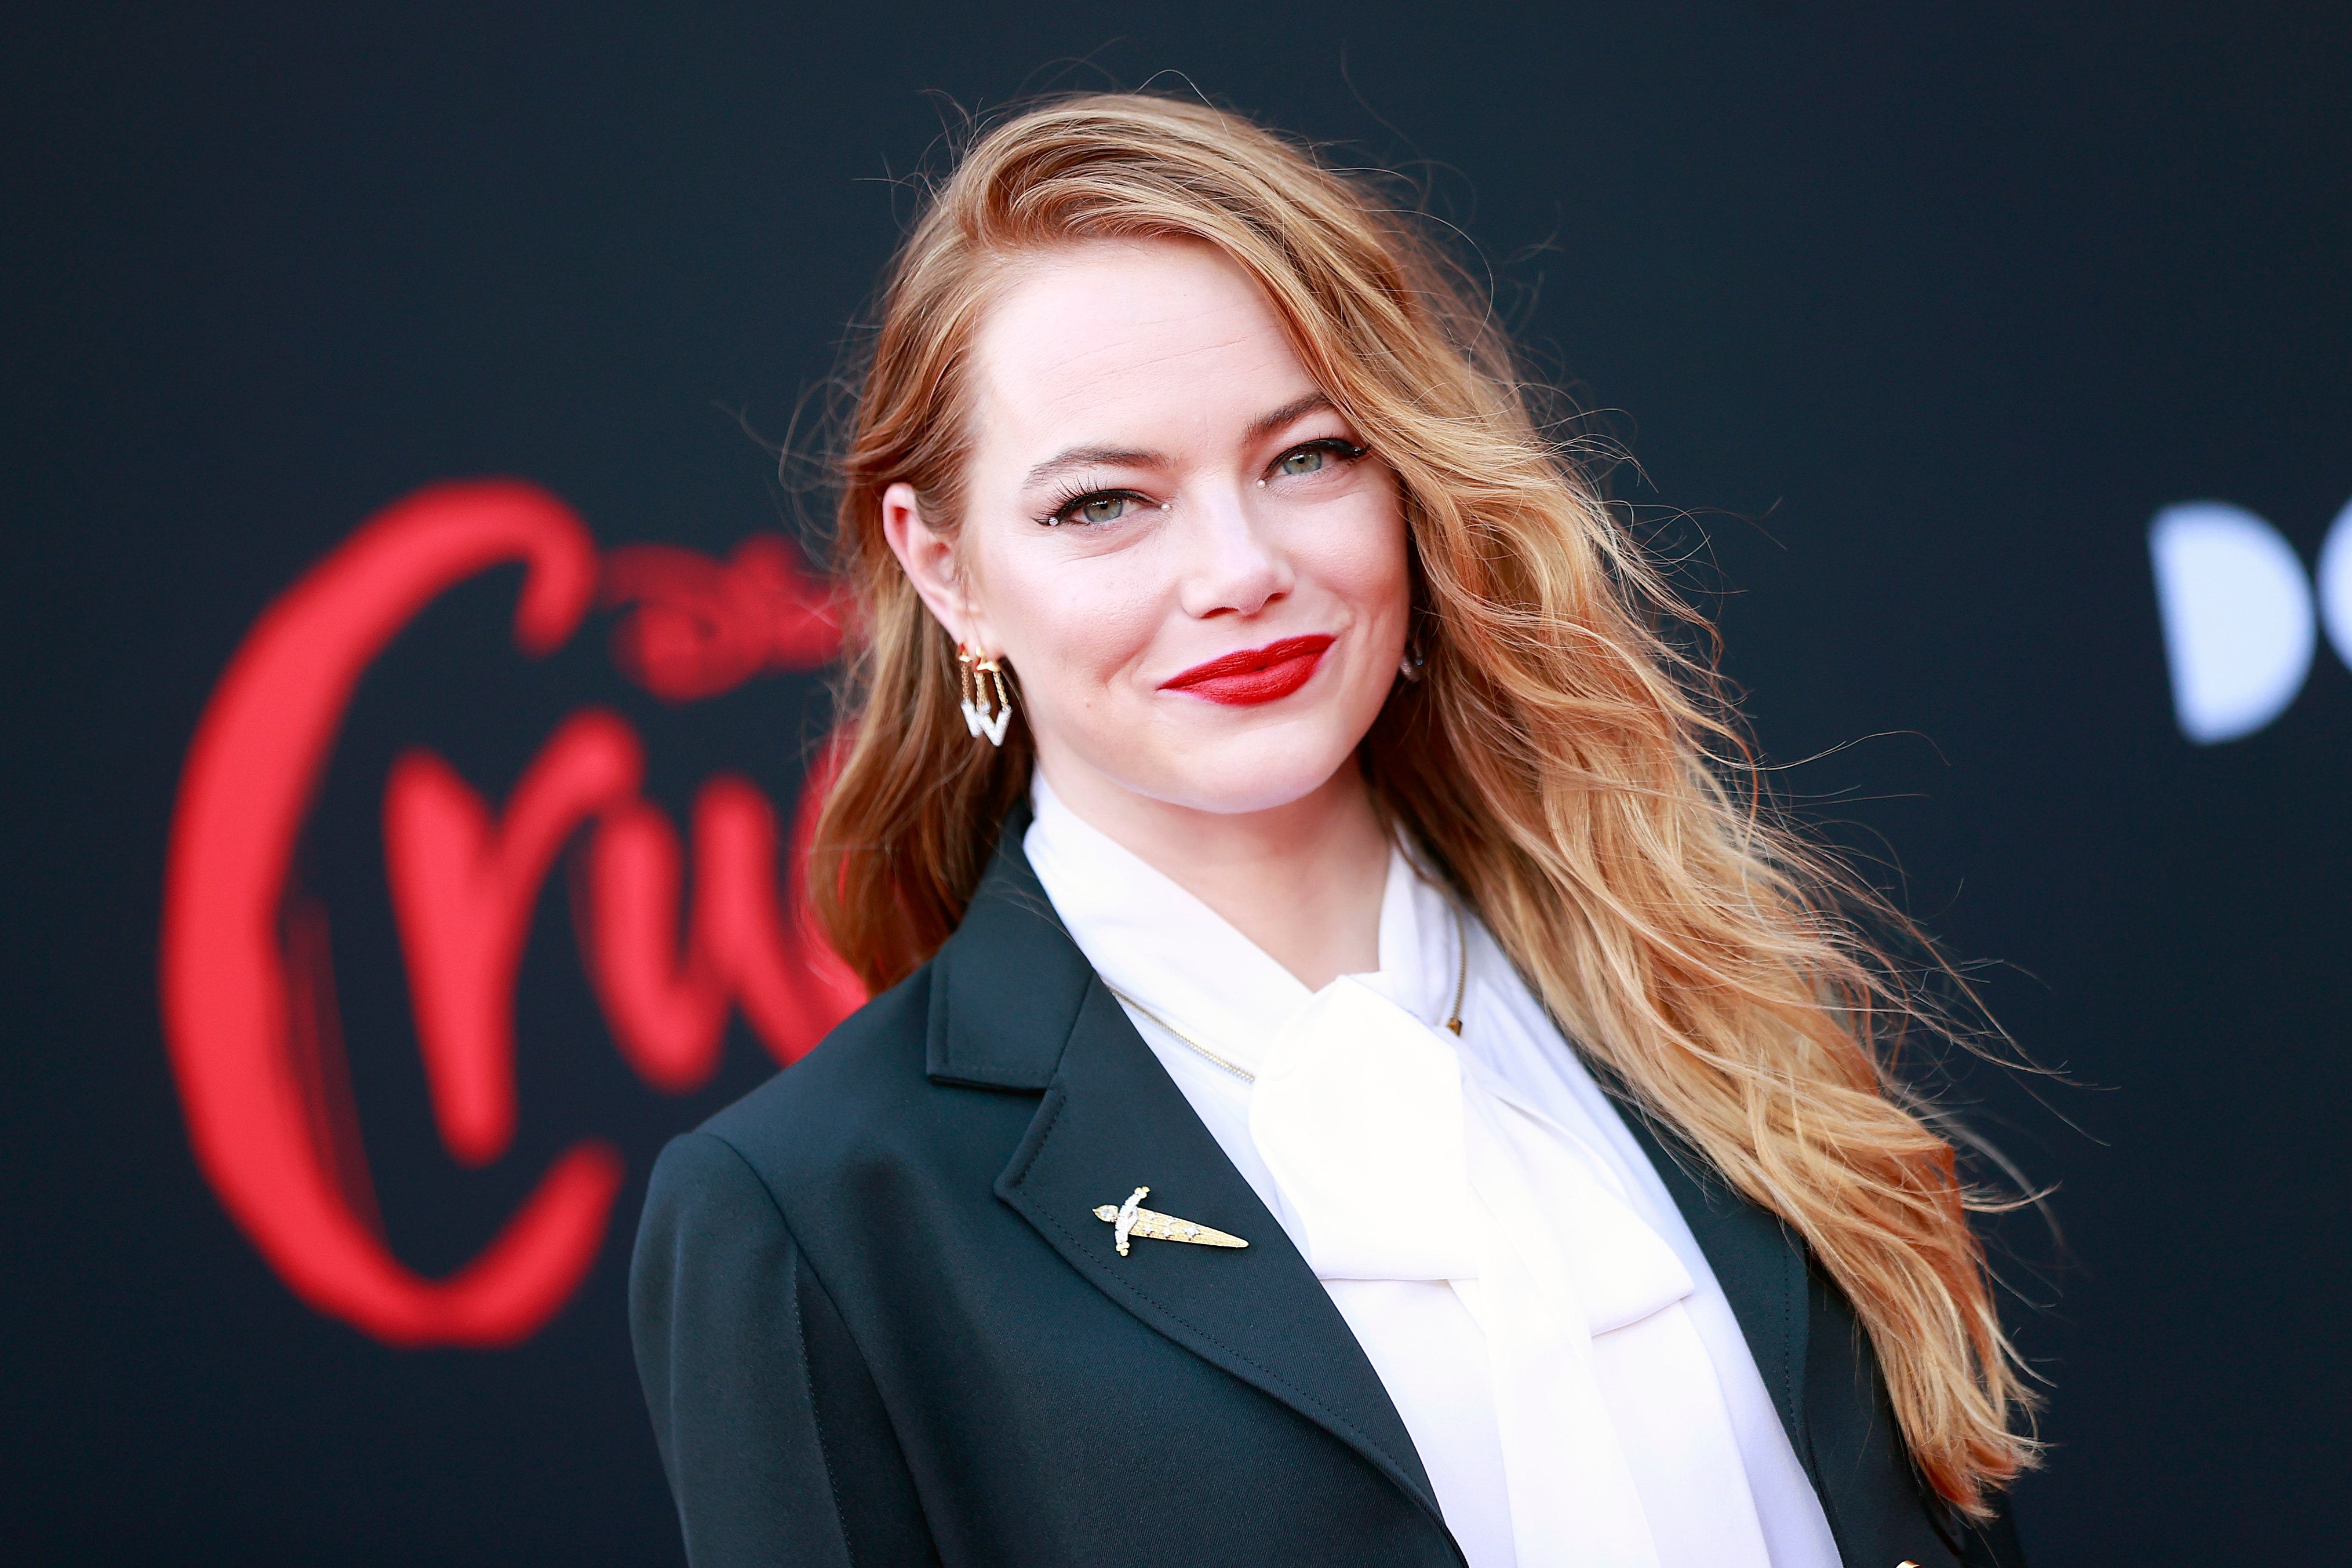 Emma Stone Rocks Chic Pantsuit at 'Cruella' Premiere in First Red